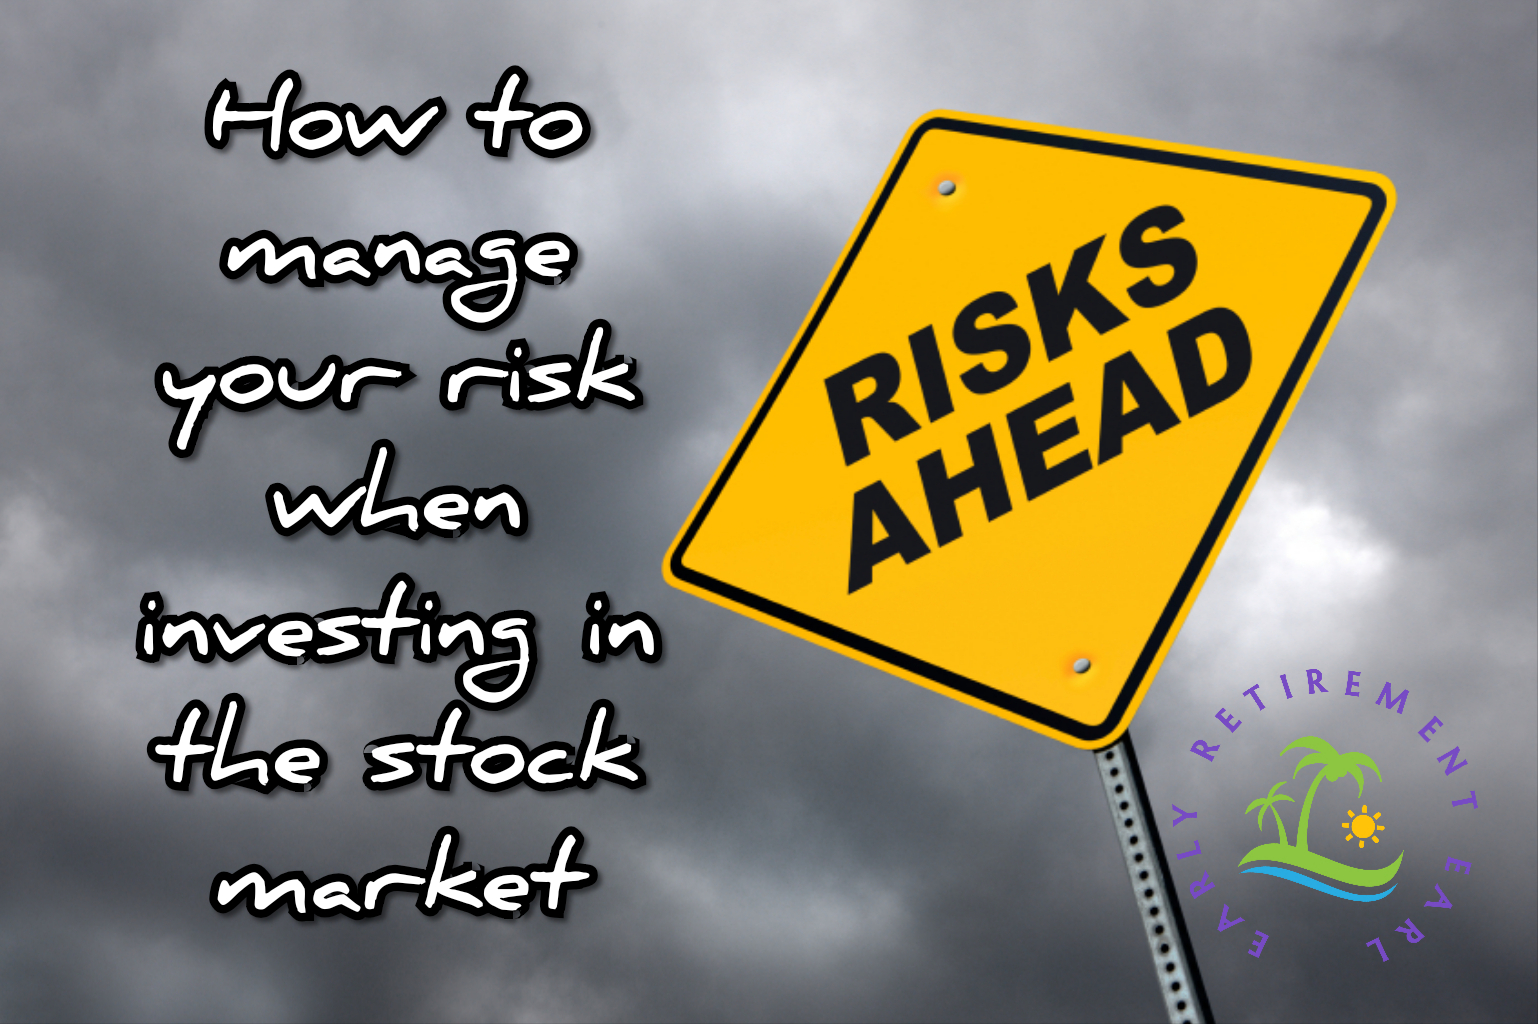 HOW TO MANAGE and lower THE RISK OF STOCK MARKET INVESTING